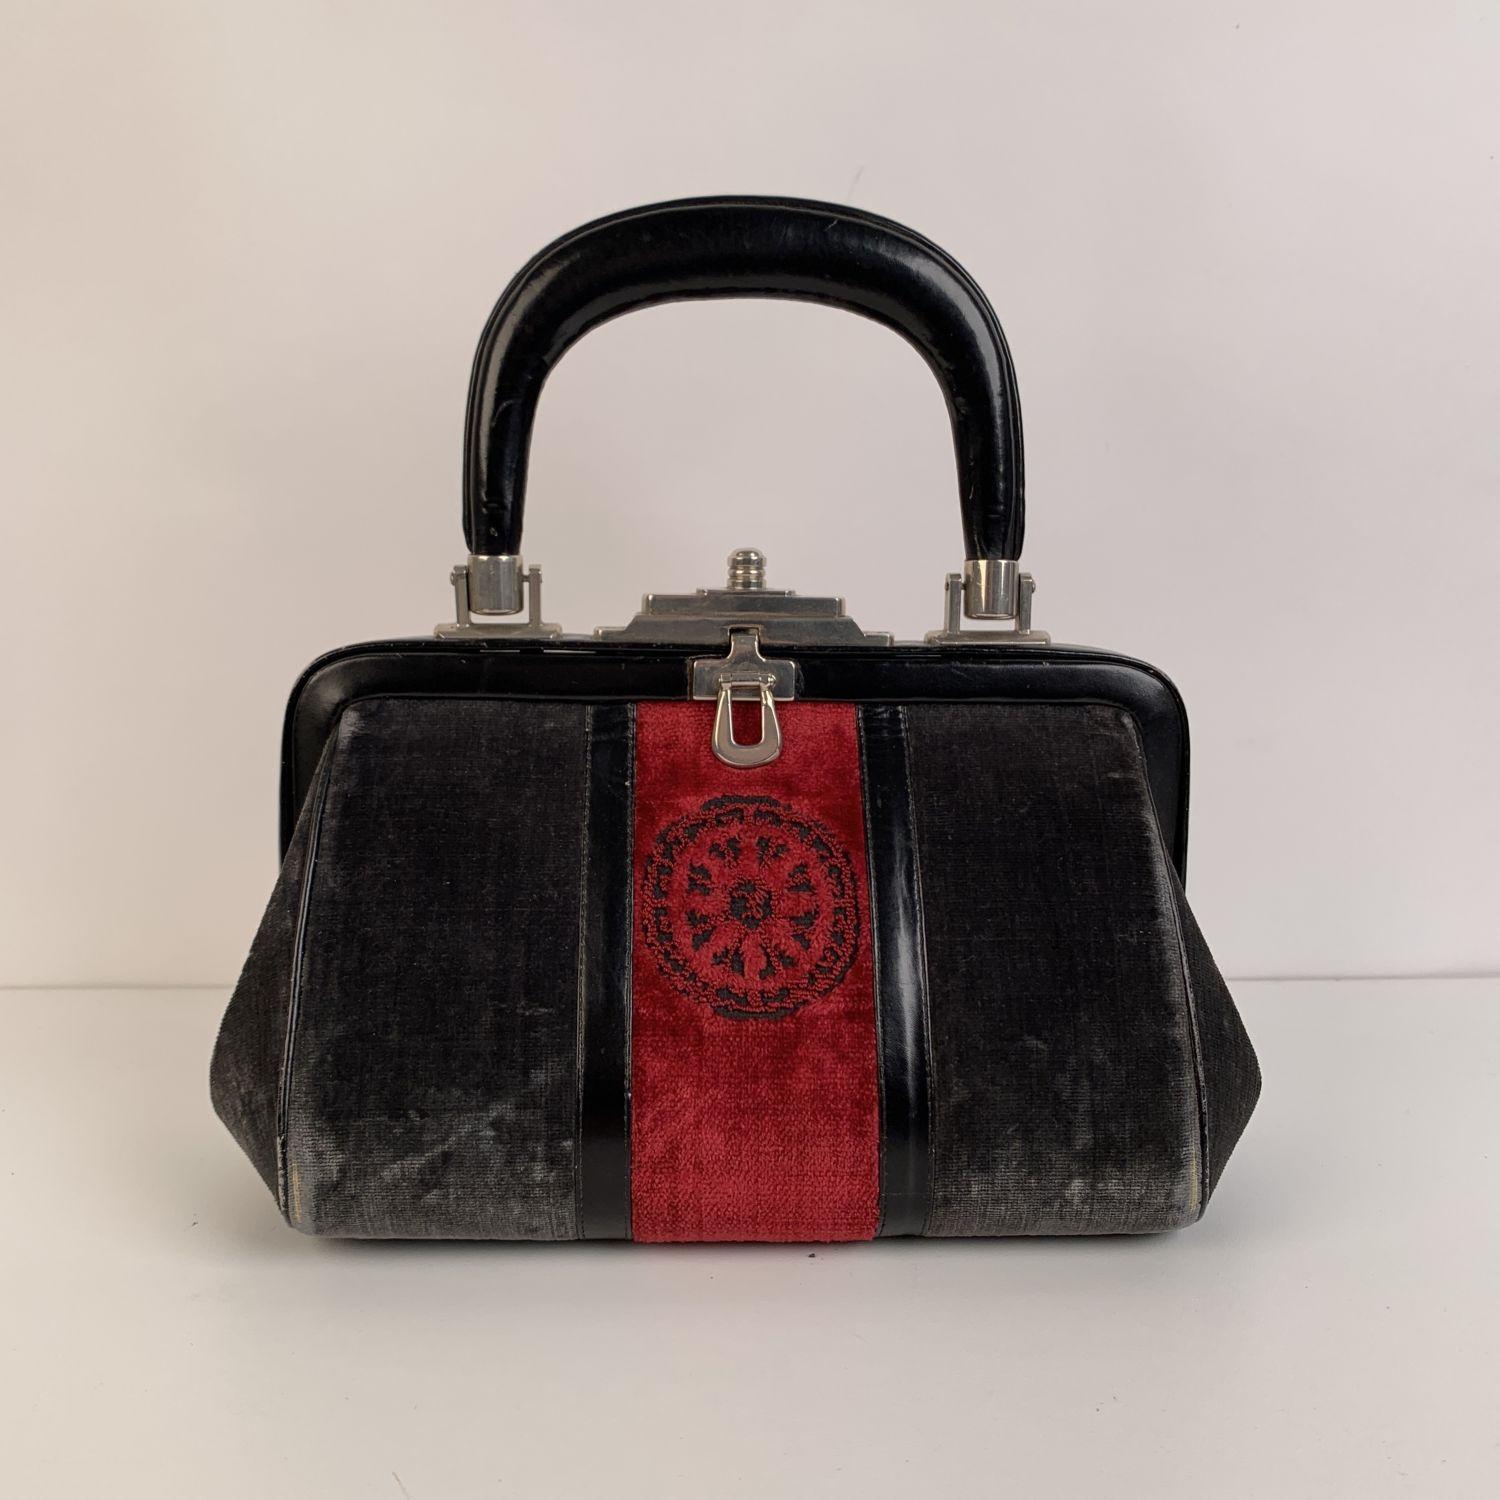 Gorgeous ROBERTA DI CAMERINO Small 'Bagonghi' Doctor Bag! Classic style in gray velvet with red cut-out 'Meridiana' design on the front. It features a leather top-handle and a push-lock closure. Leather lined interior with zipper and open pockets.